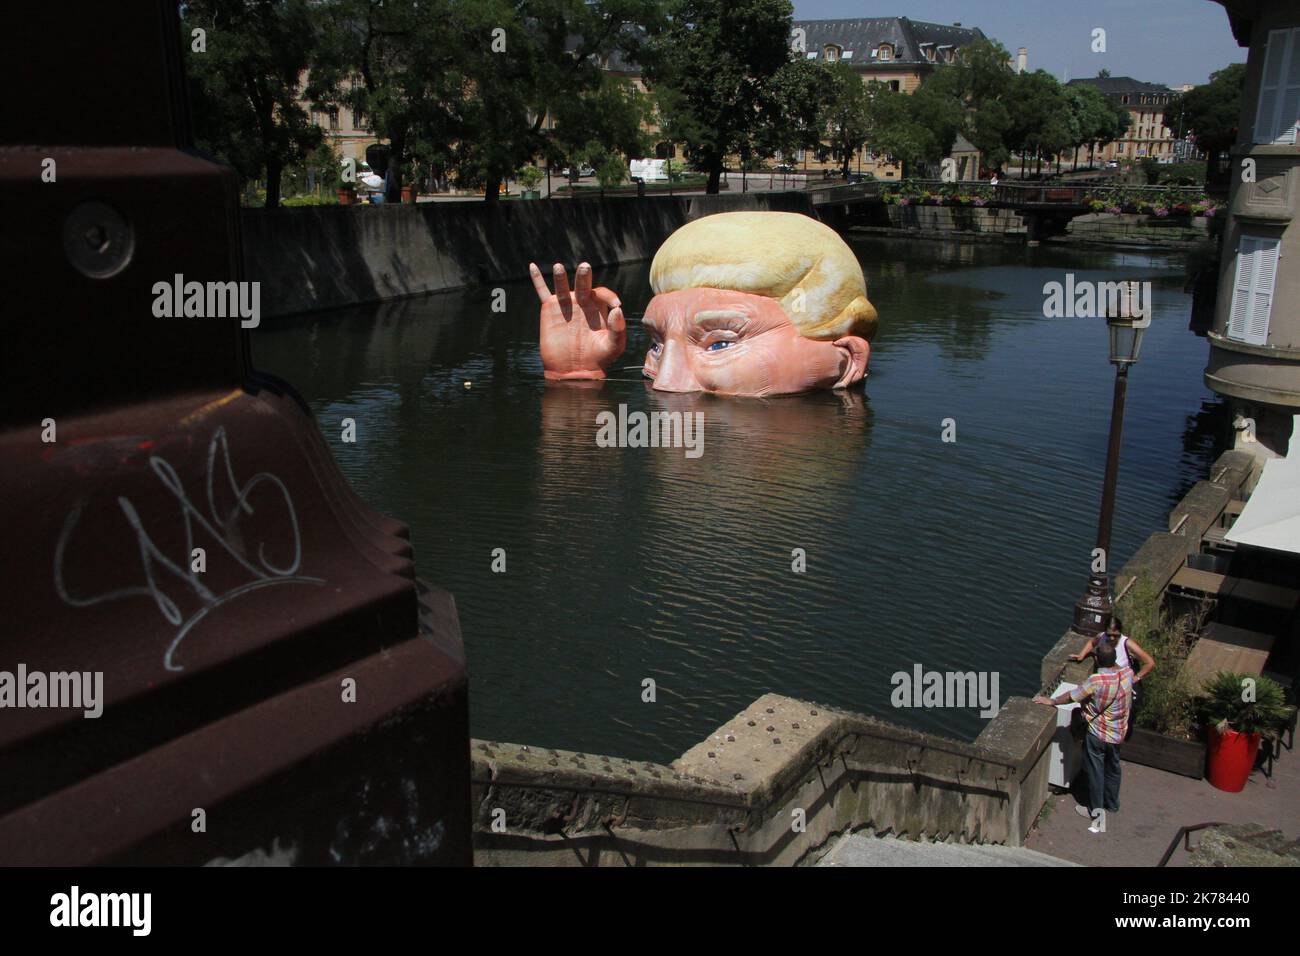 The installation 'Everything is fine' depicting the half submerged head of US President Donald Trump by Jacques Rival, architect, displayed in the Moselle river as part of the digital art festival 'Constellations de Metz' in Metz, eastern France.  Stock Photo